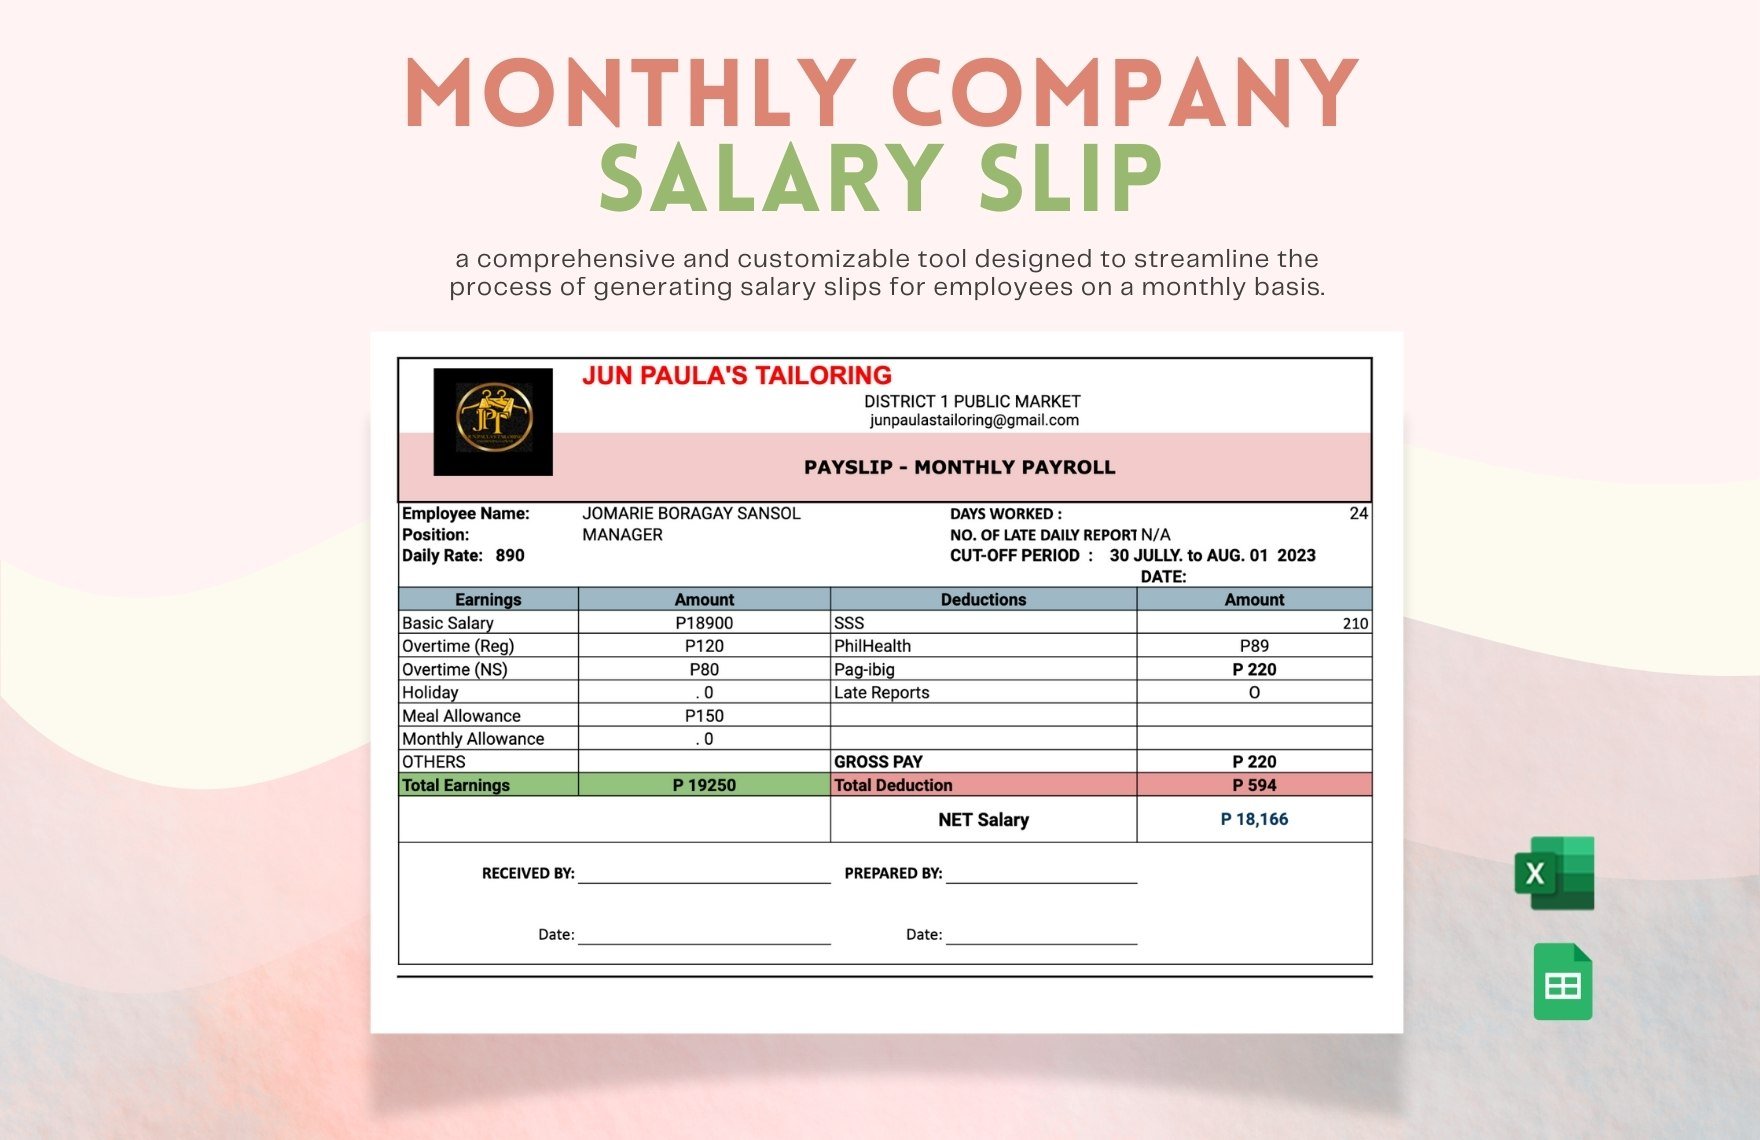 Monthly Company Salary Slip in Excel, Google Sheets